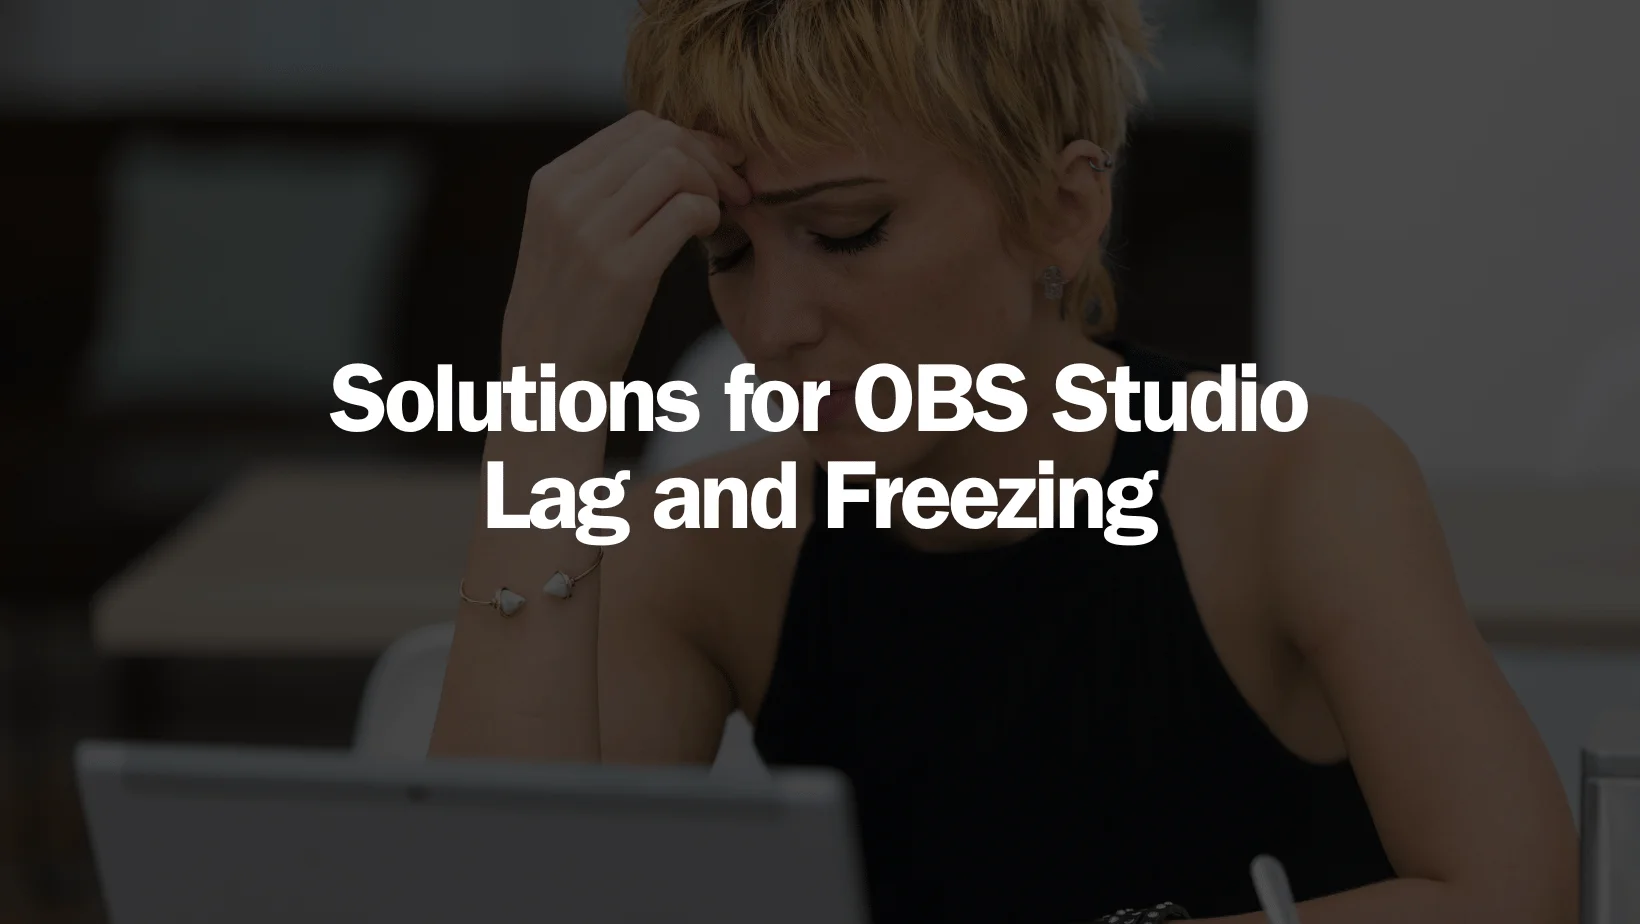 Solutions for OBS Studio Lag and Freezing